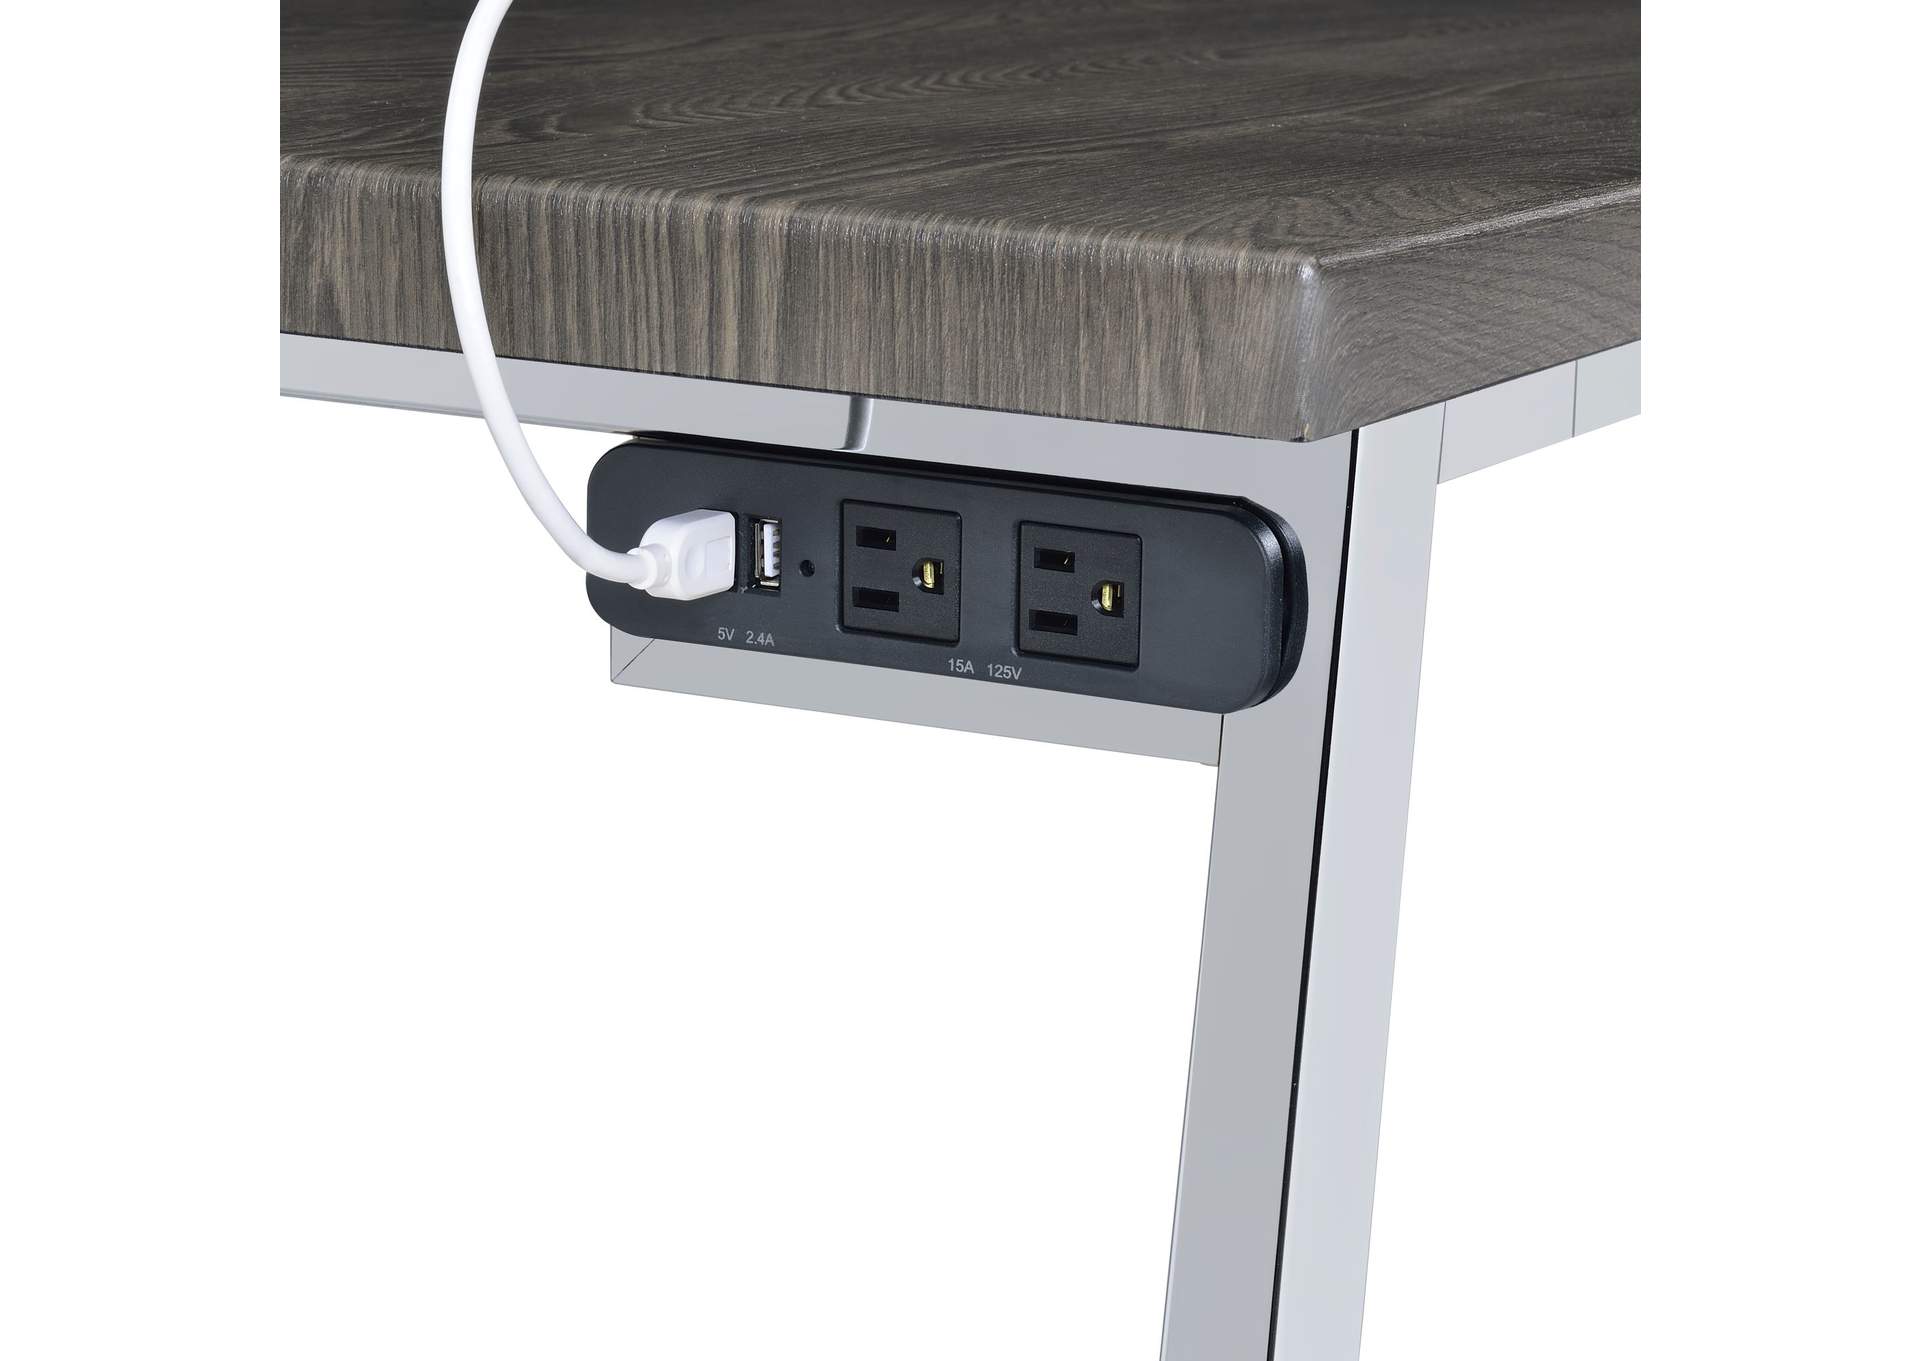 Nadia - Brown Top - 3A Bar Table Single Pack Table Three Stools,Elements